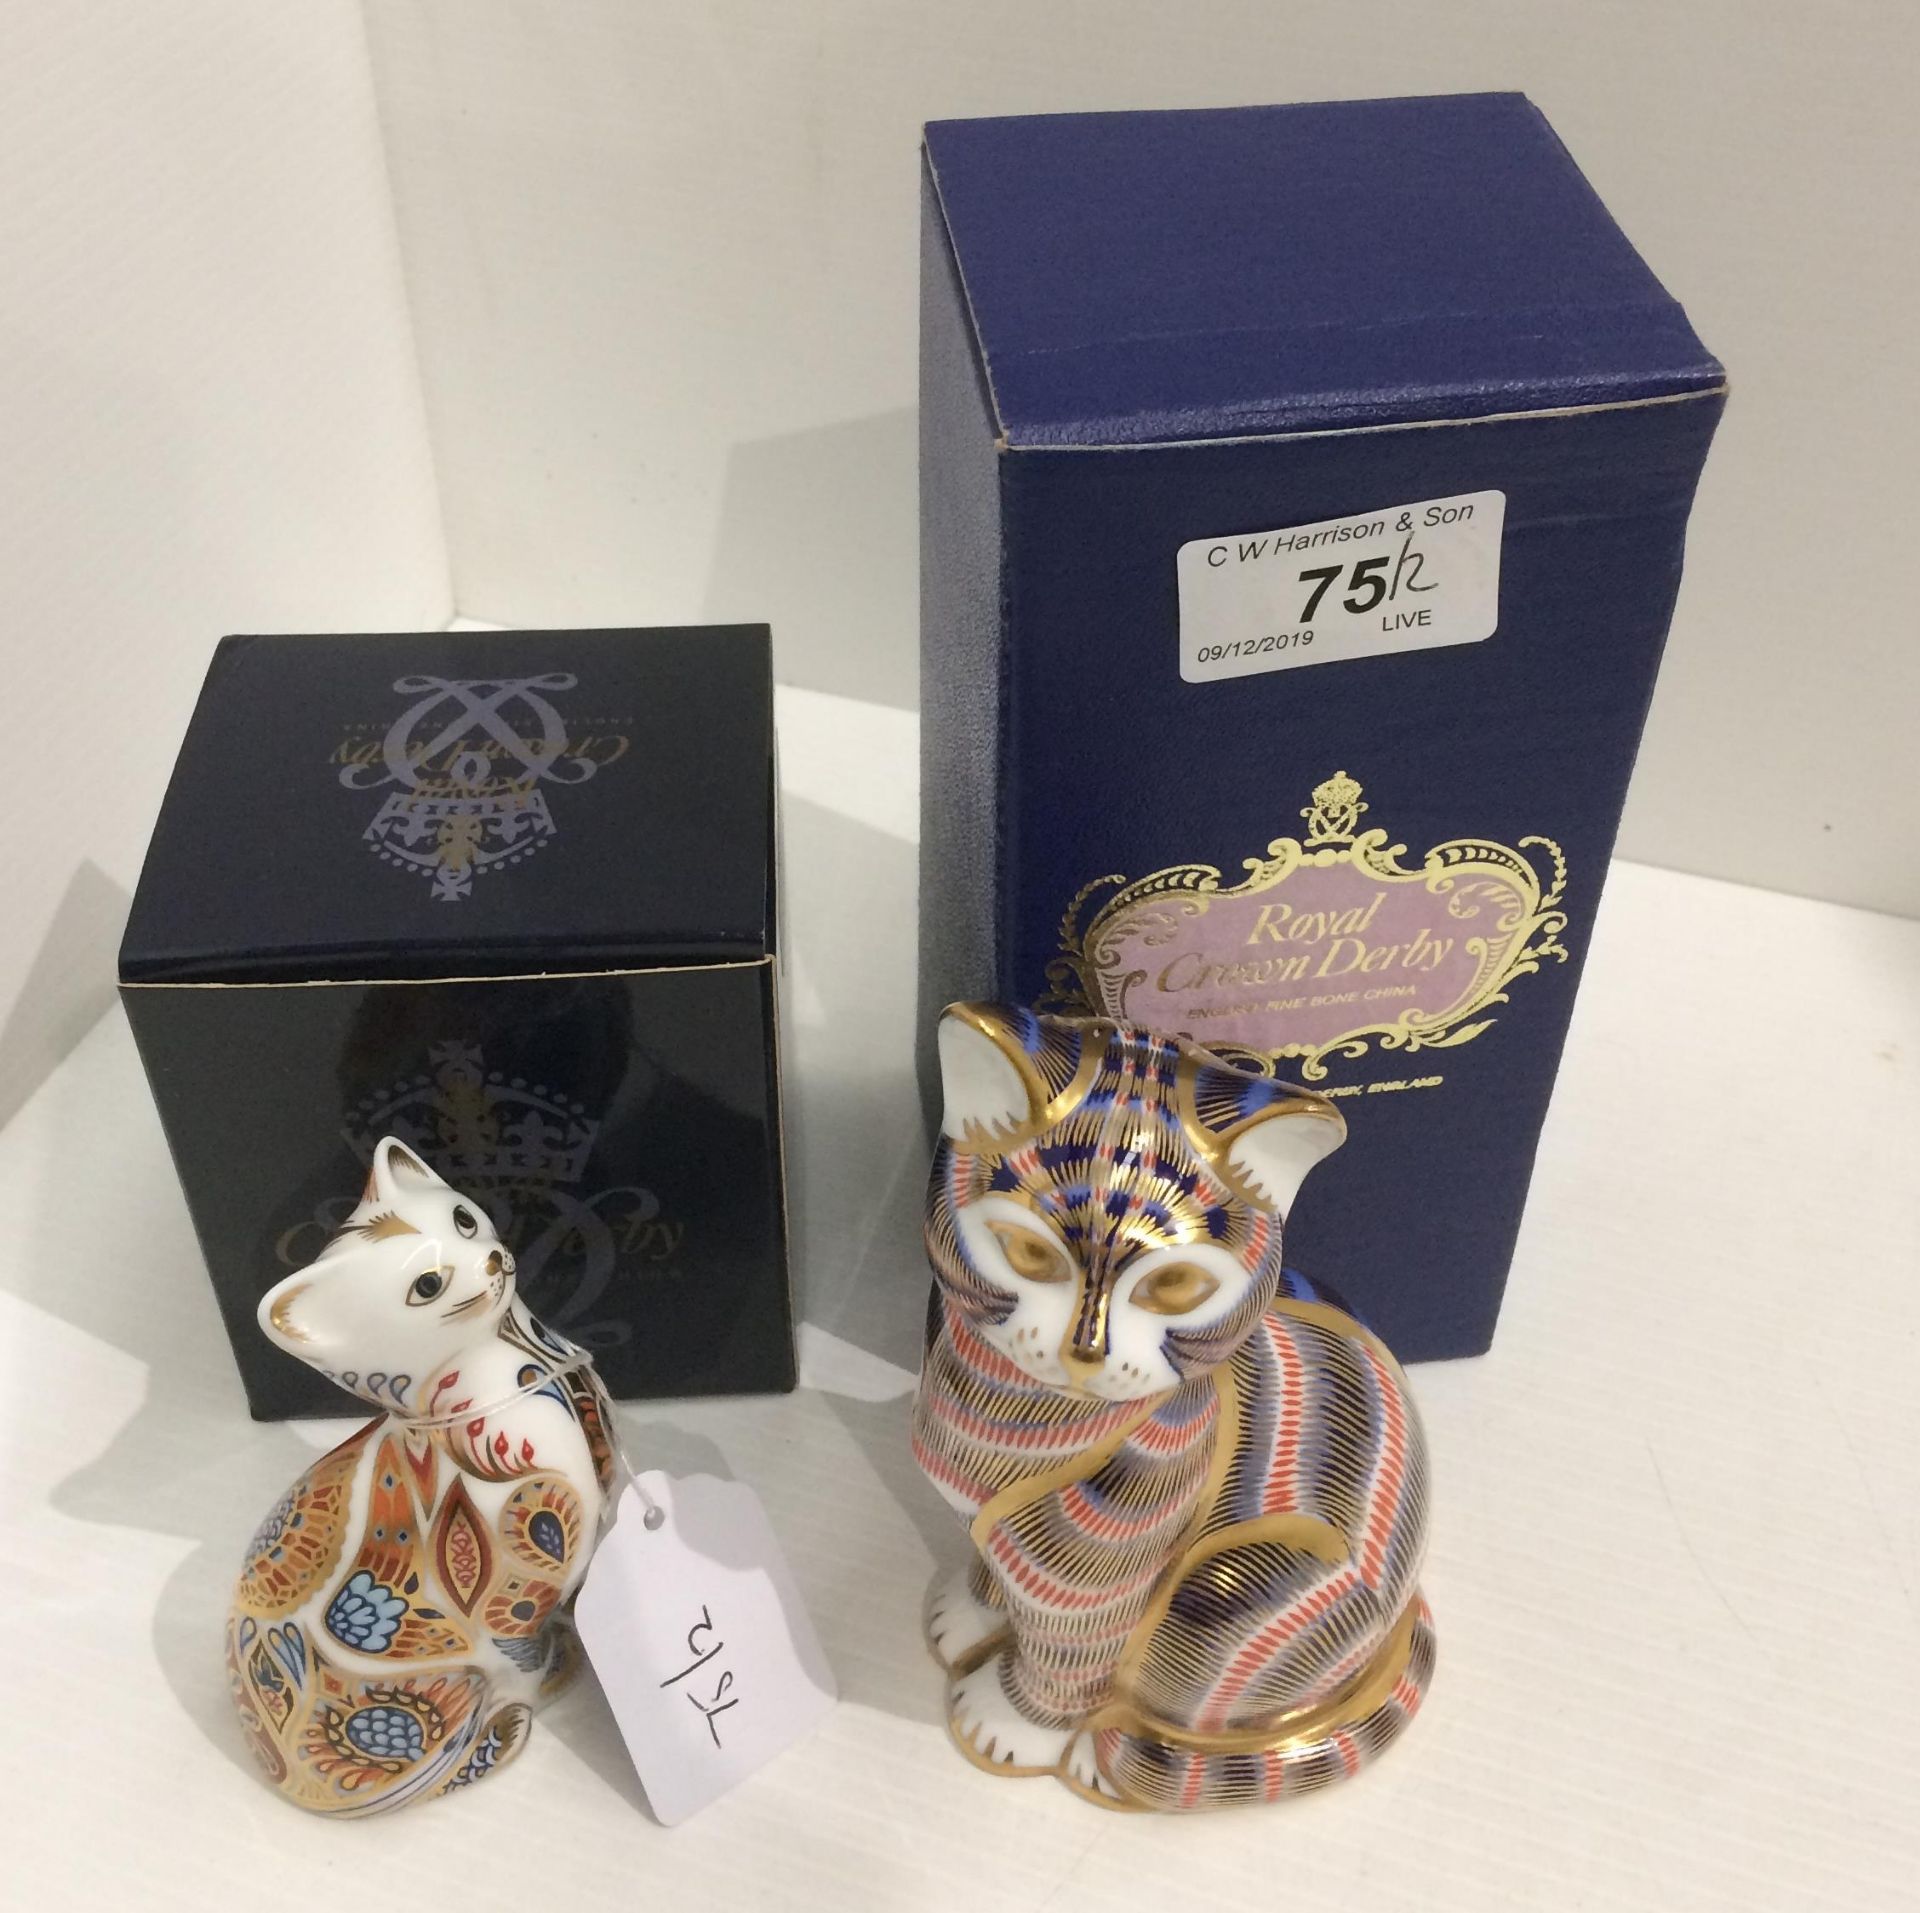 Two Royal Crown Derby bone china paperweights - Cat 13.5cm high and Siamese Kitten 9.